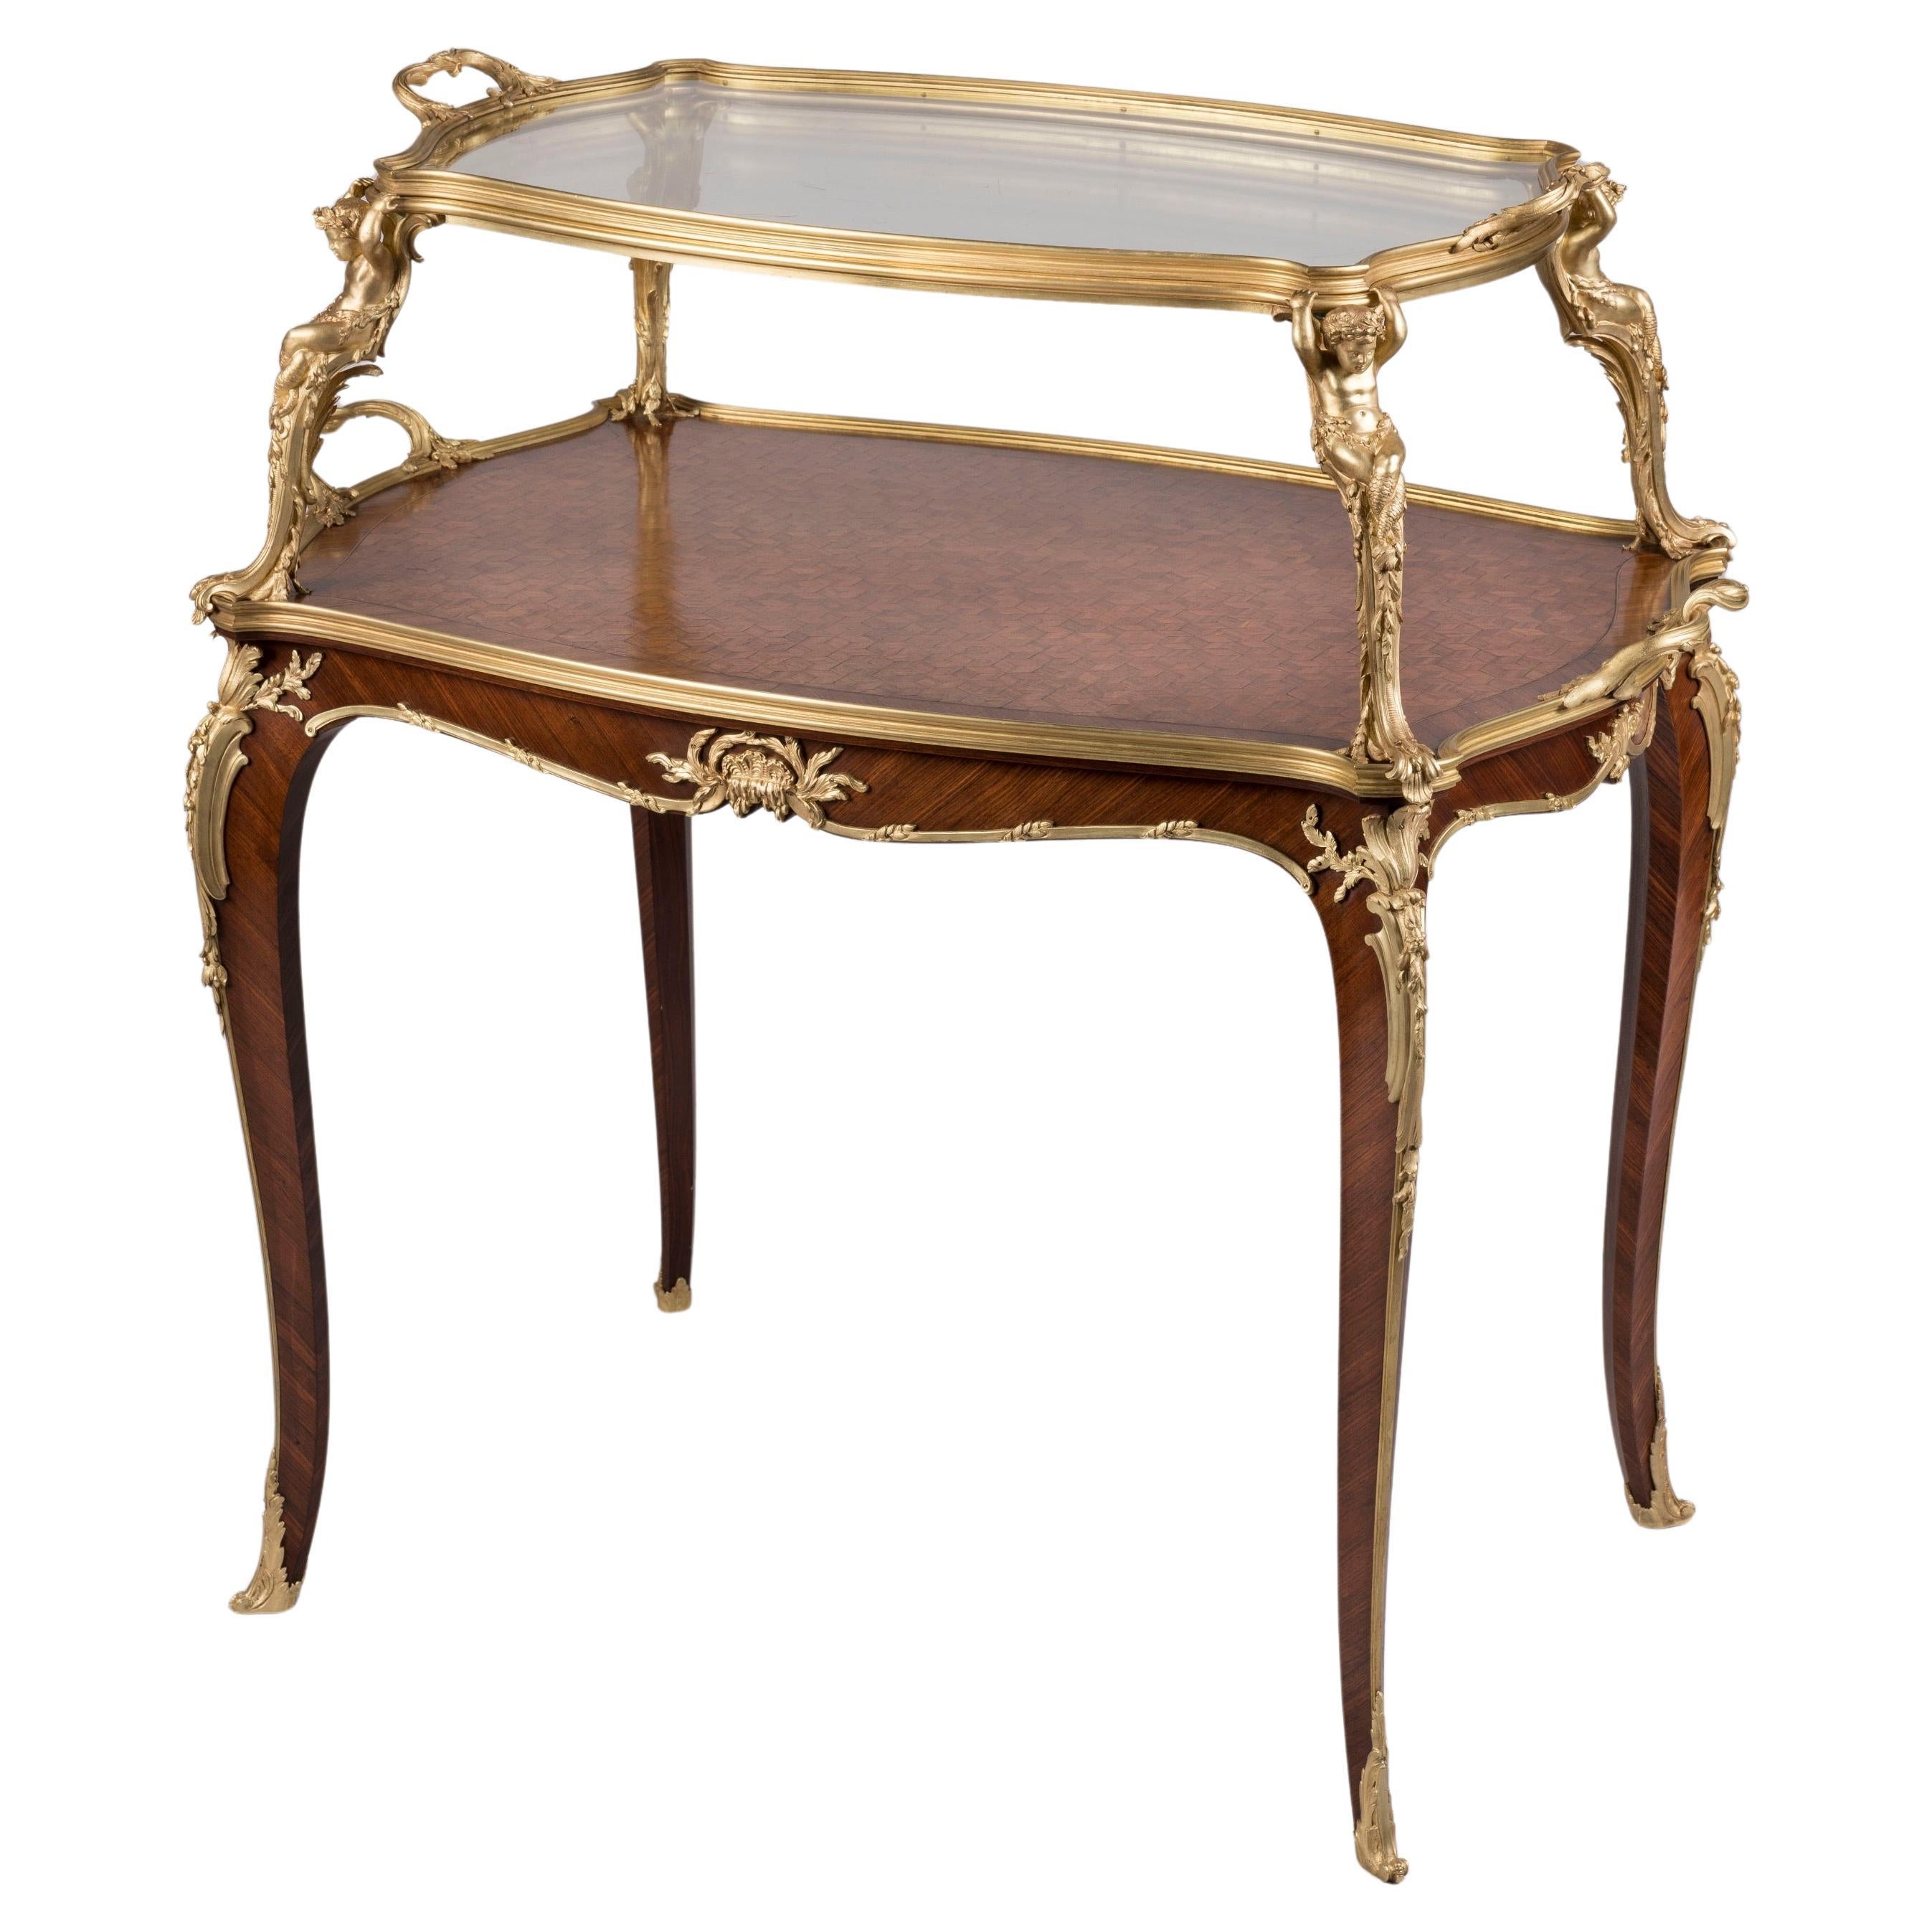 Exceptional 19th Century Kingwood and Ormolu Tray Top Table by François Linke